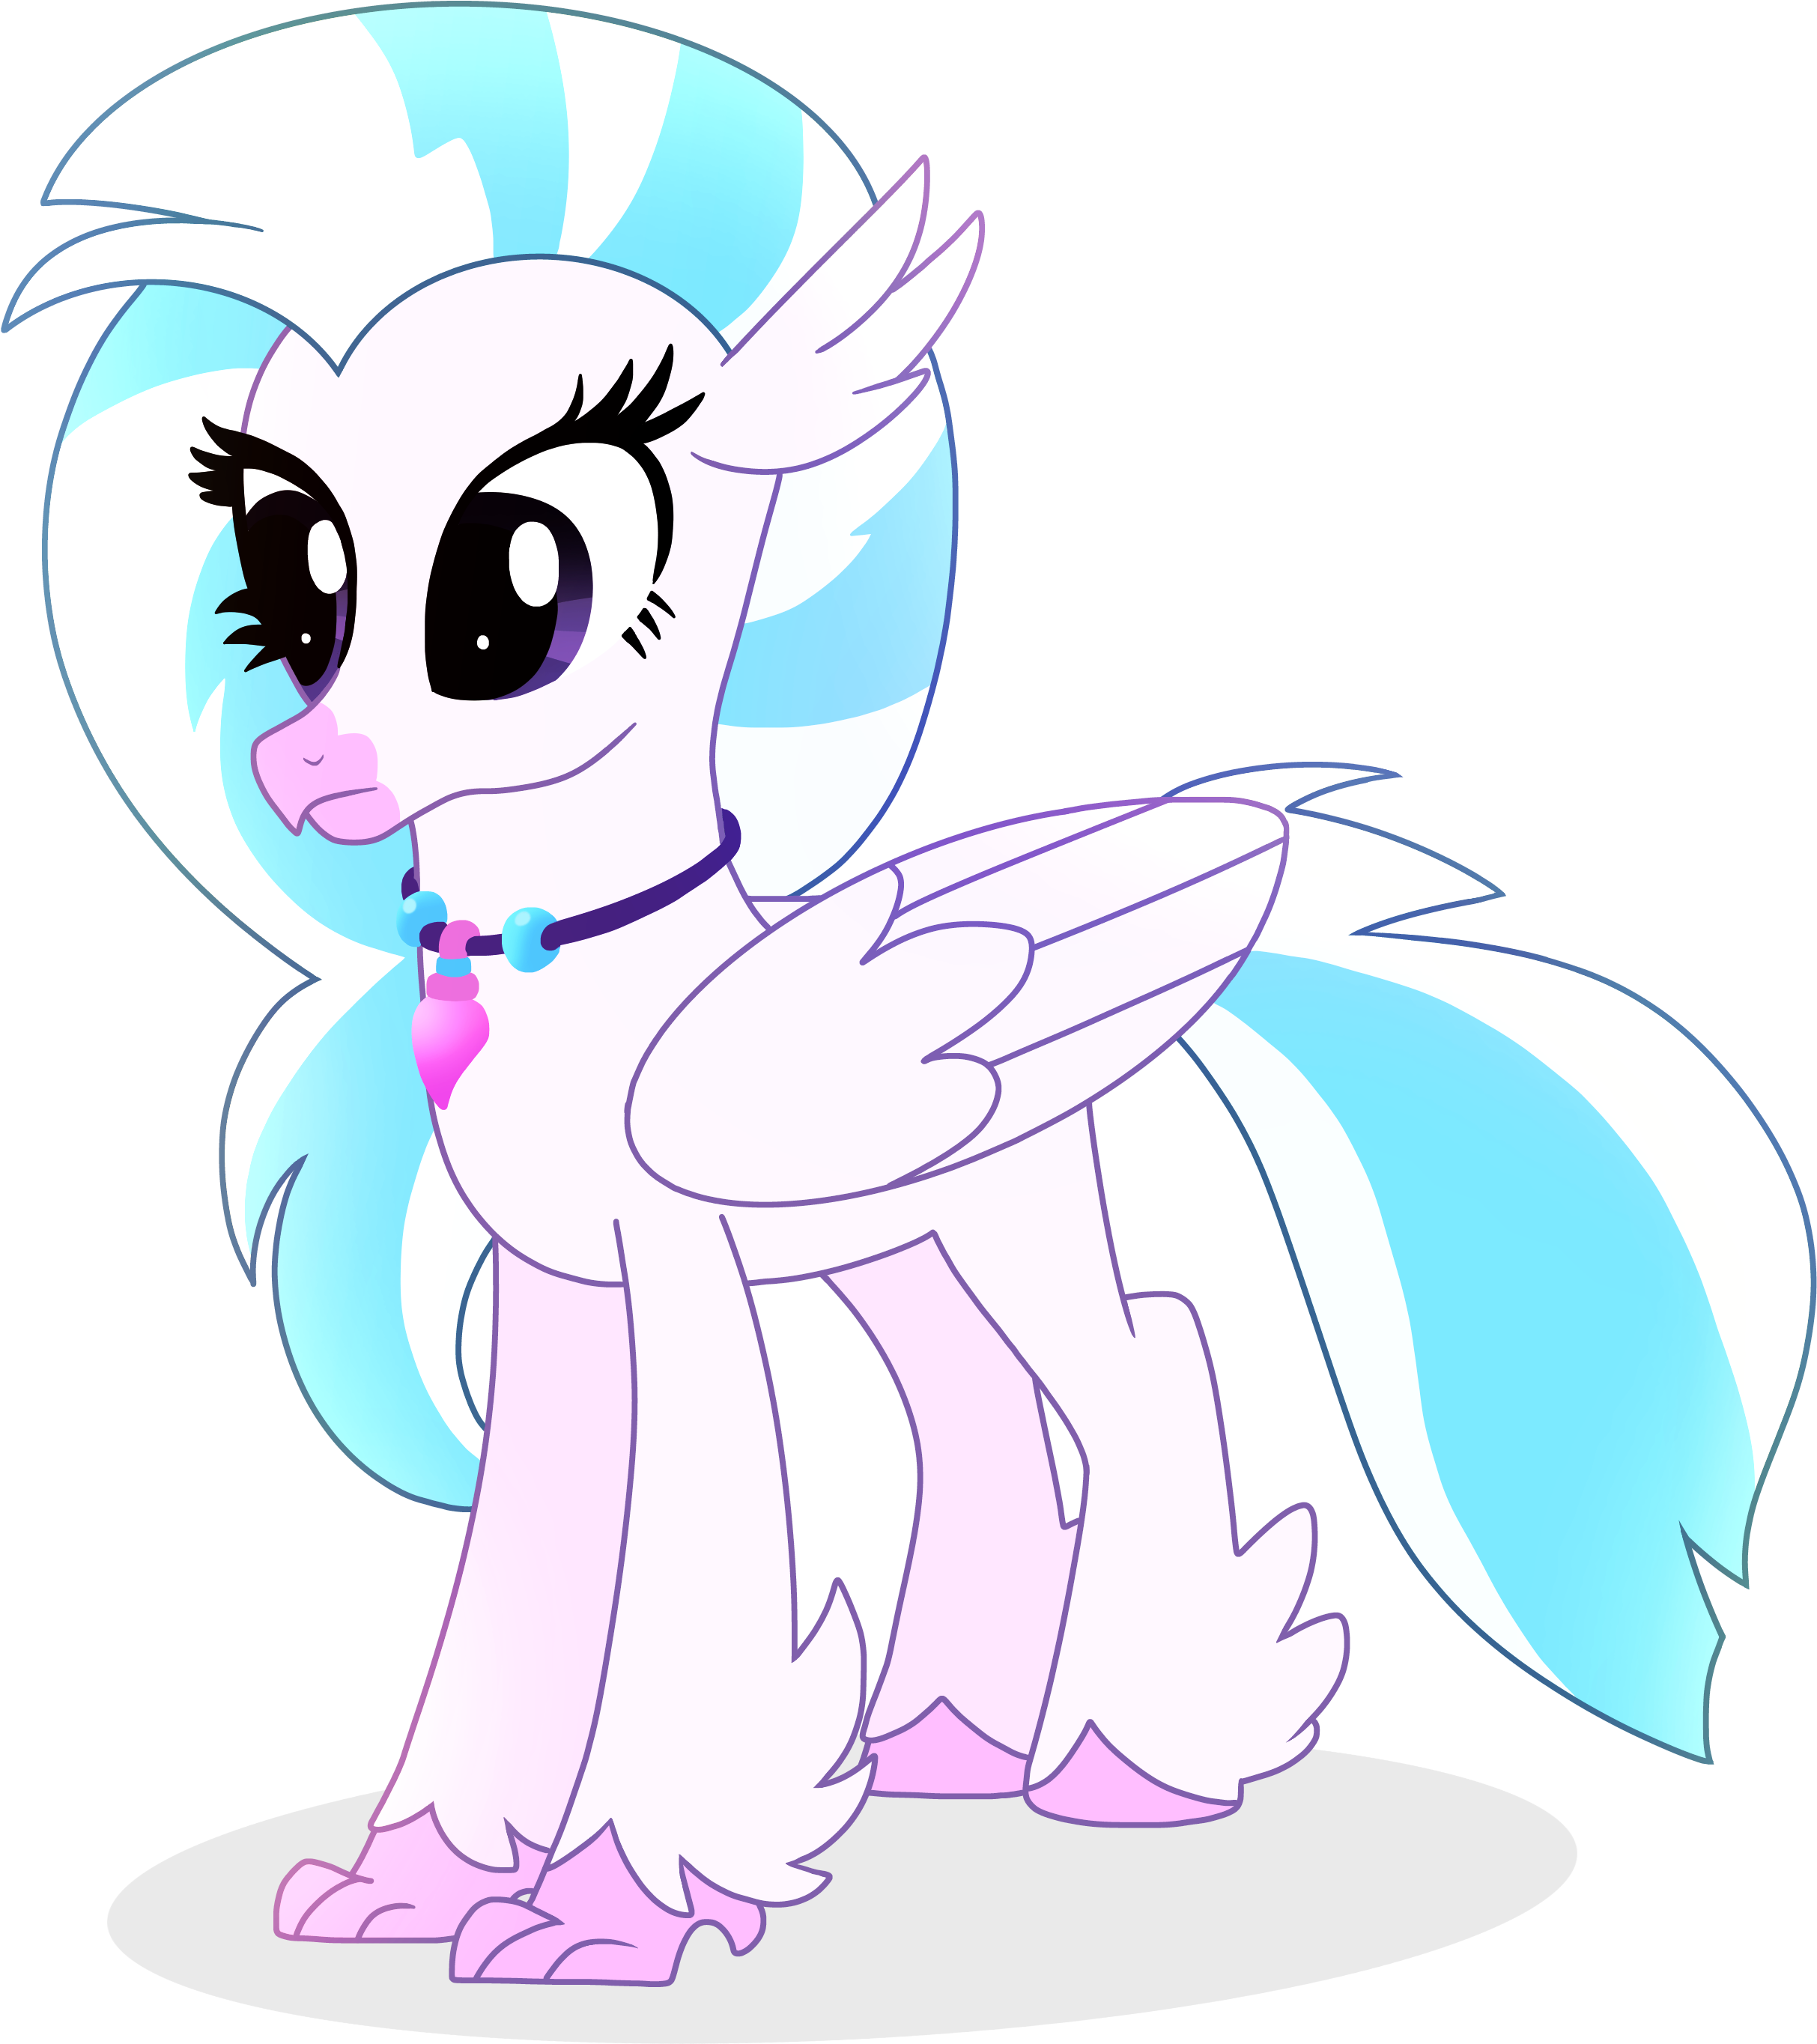 Top Images For Mlp Sea Pony Gen 4 On Picsunday - Mlp Season 8 Silver Stream (2689x2876)